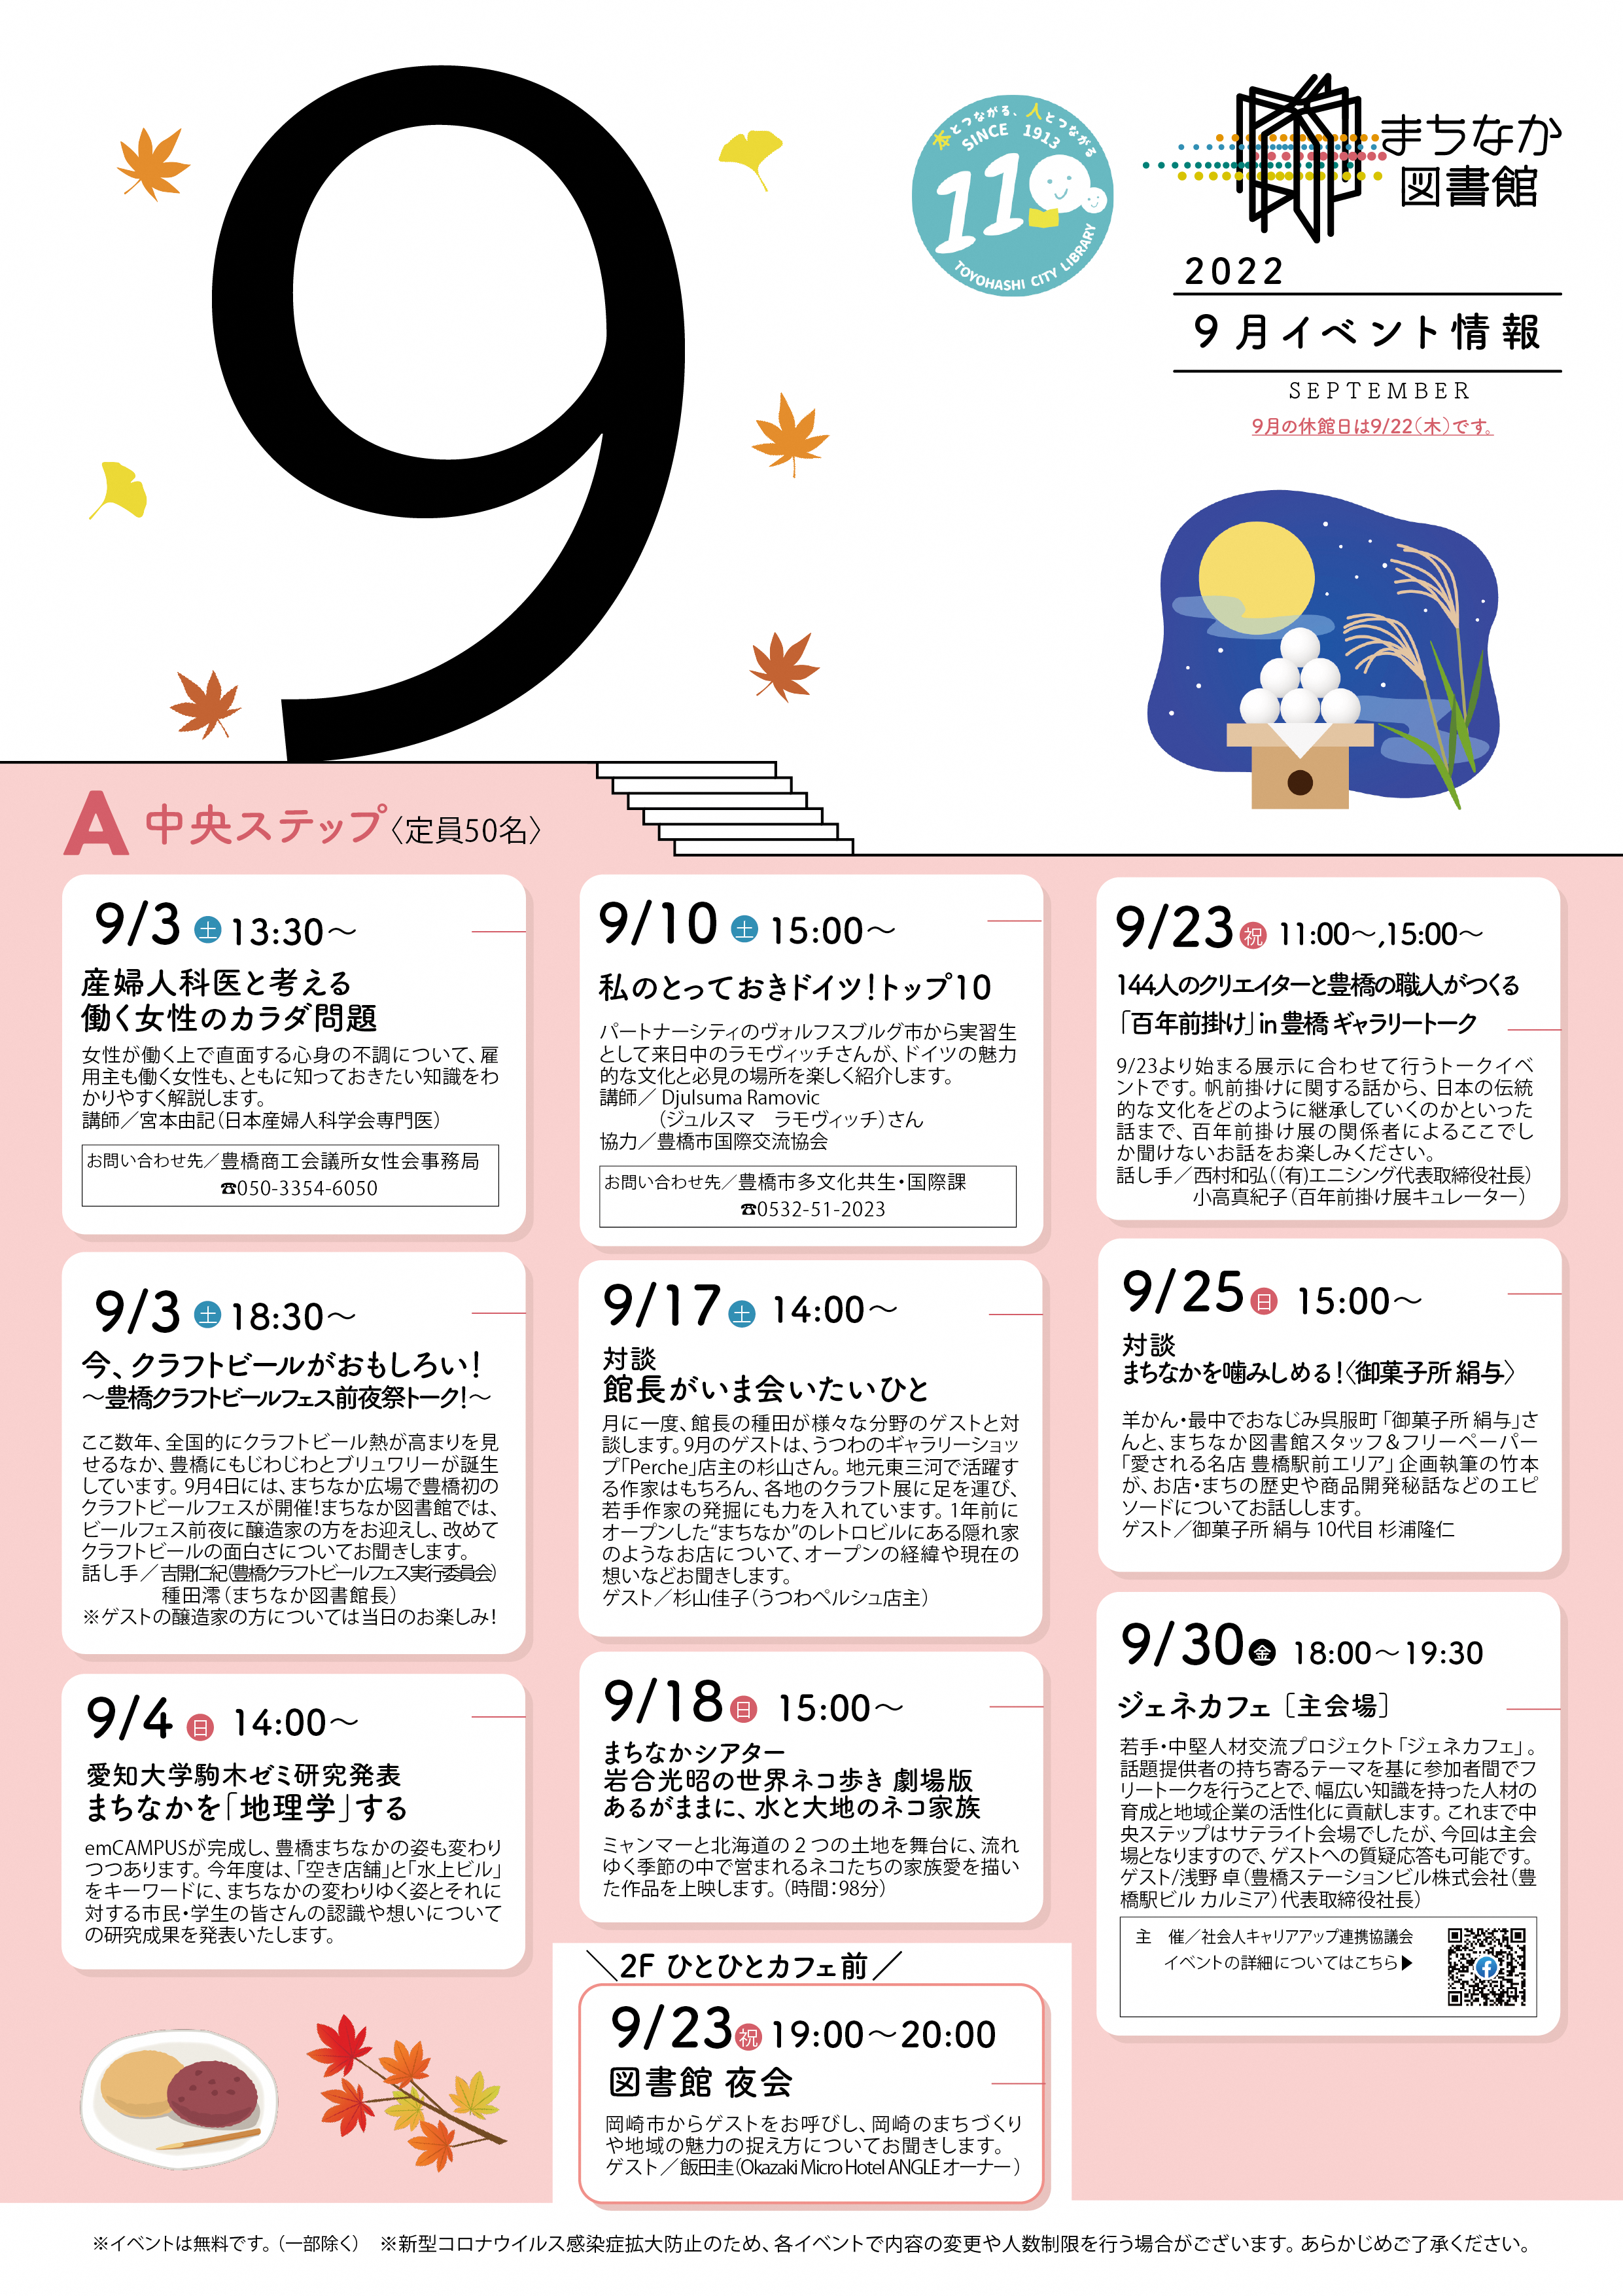 https://www.library.toyohashi.aichi.jp/facility/machinaka/event/66a4ee07858ea57484193540481bbb70.png